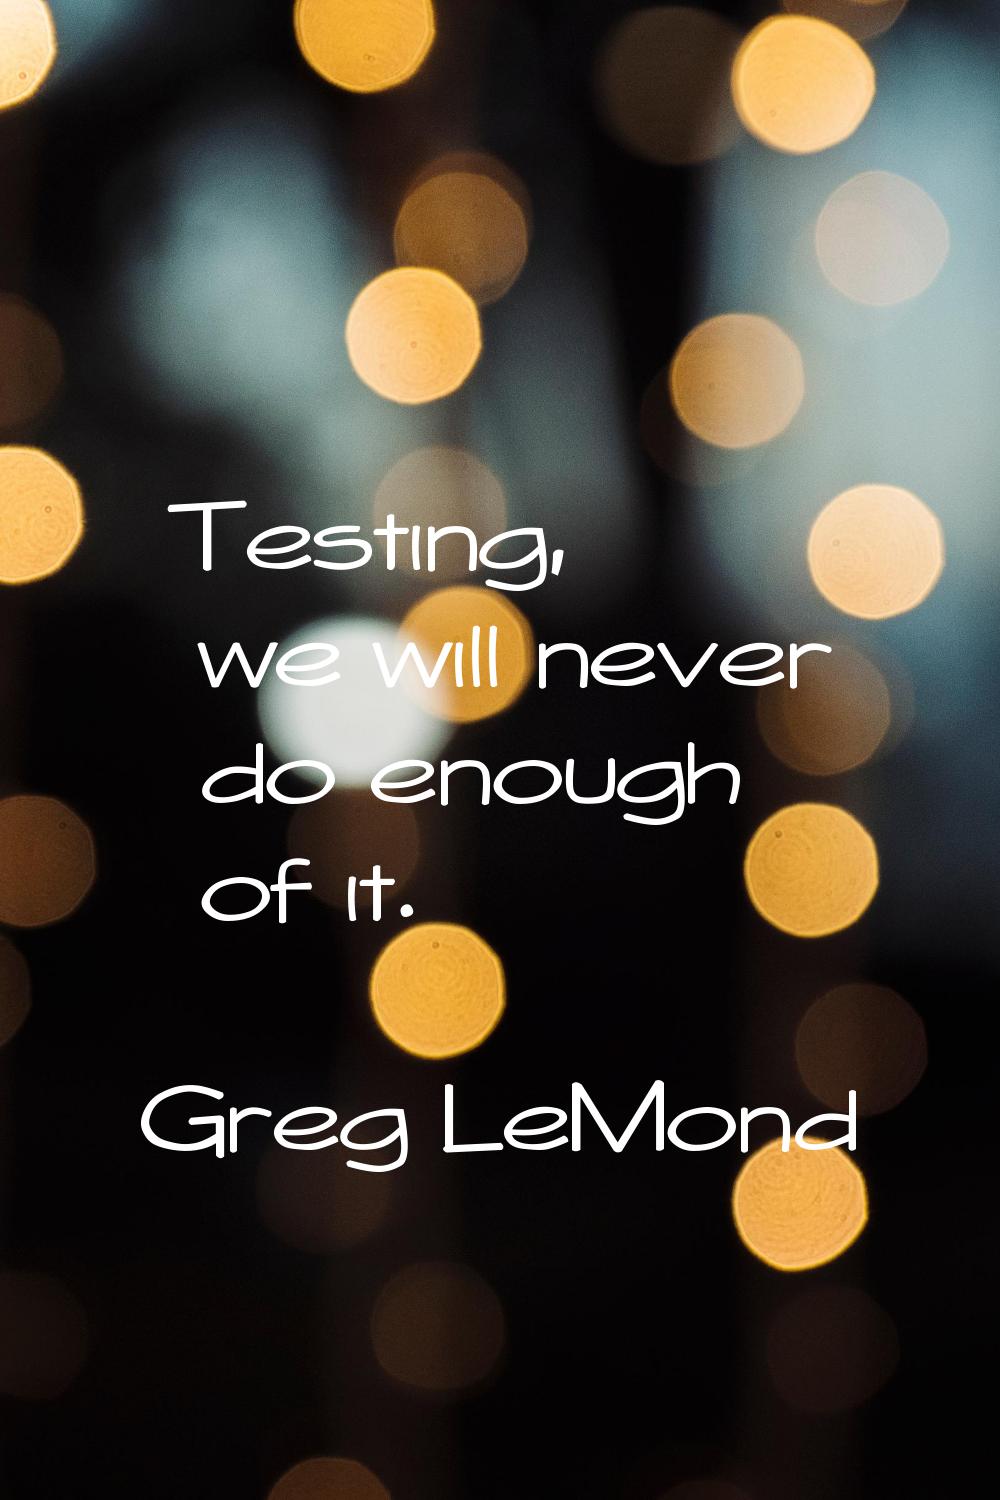 Testing, we will never do enough of it.